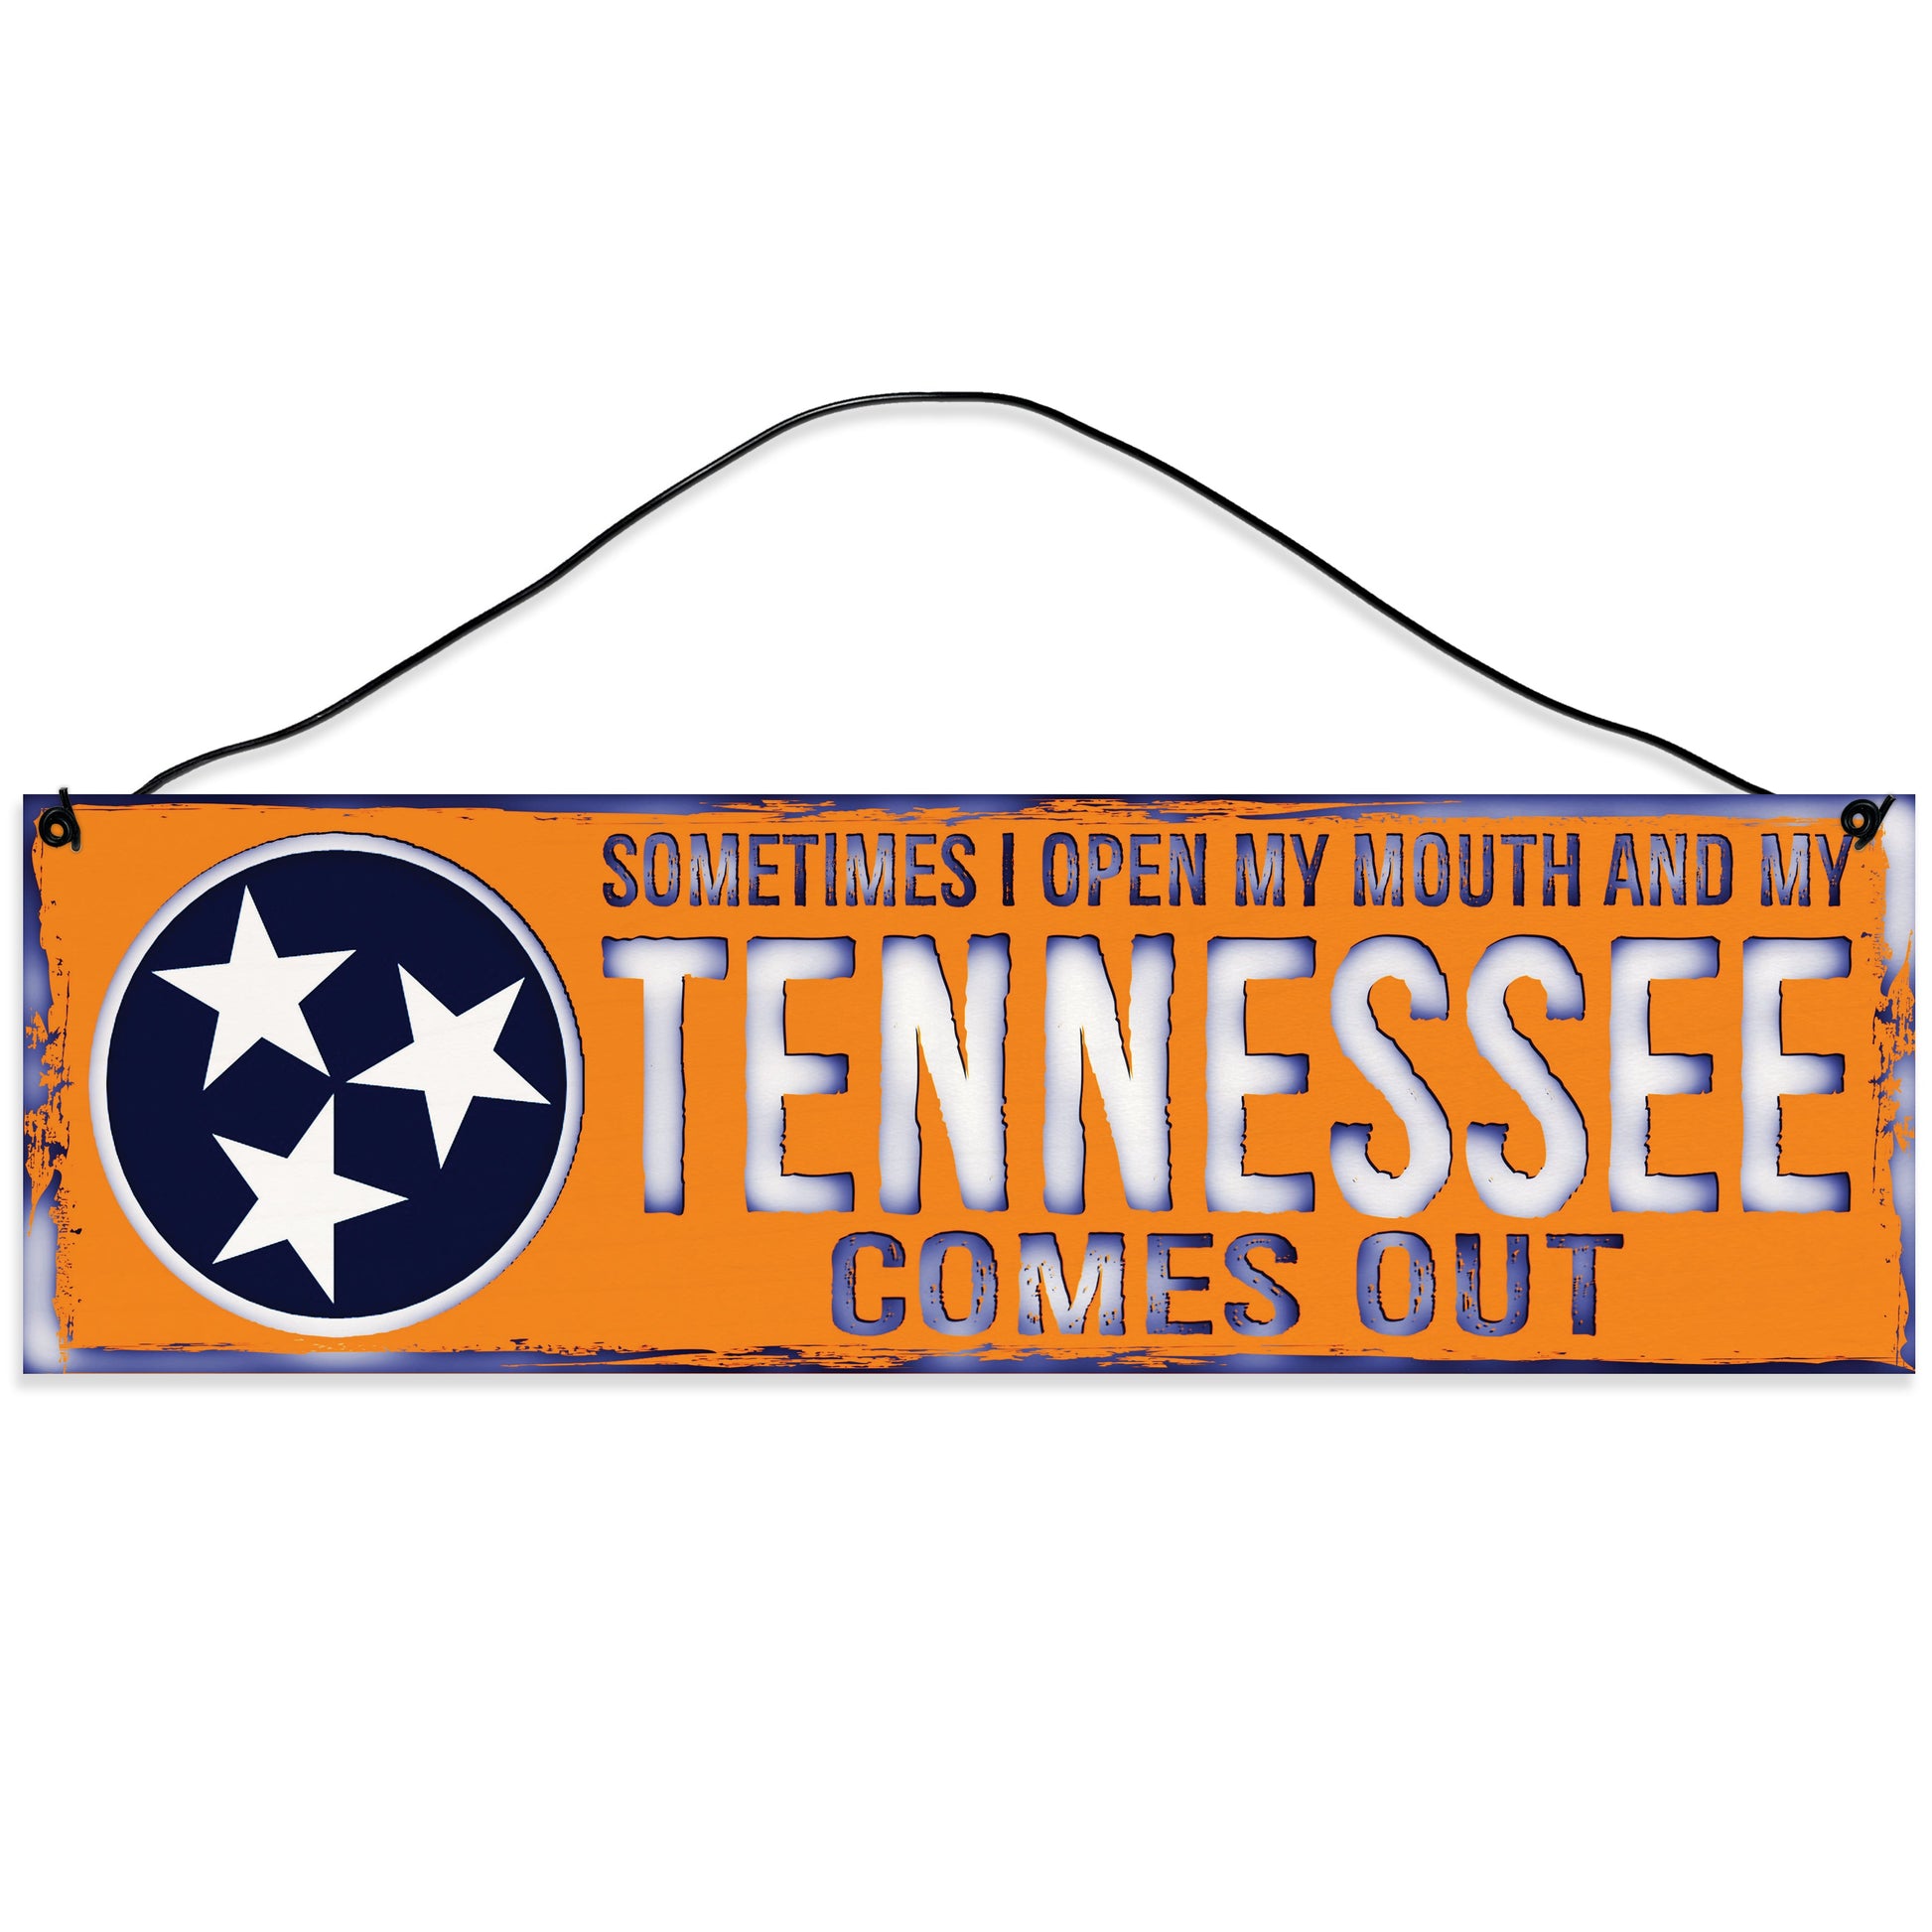 Sawyer's Mill - Sometimes I Open My Mouth and My Tennessee Comes Out. Wood Sign for Home or Office. Measures 3x10 inches.